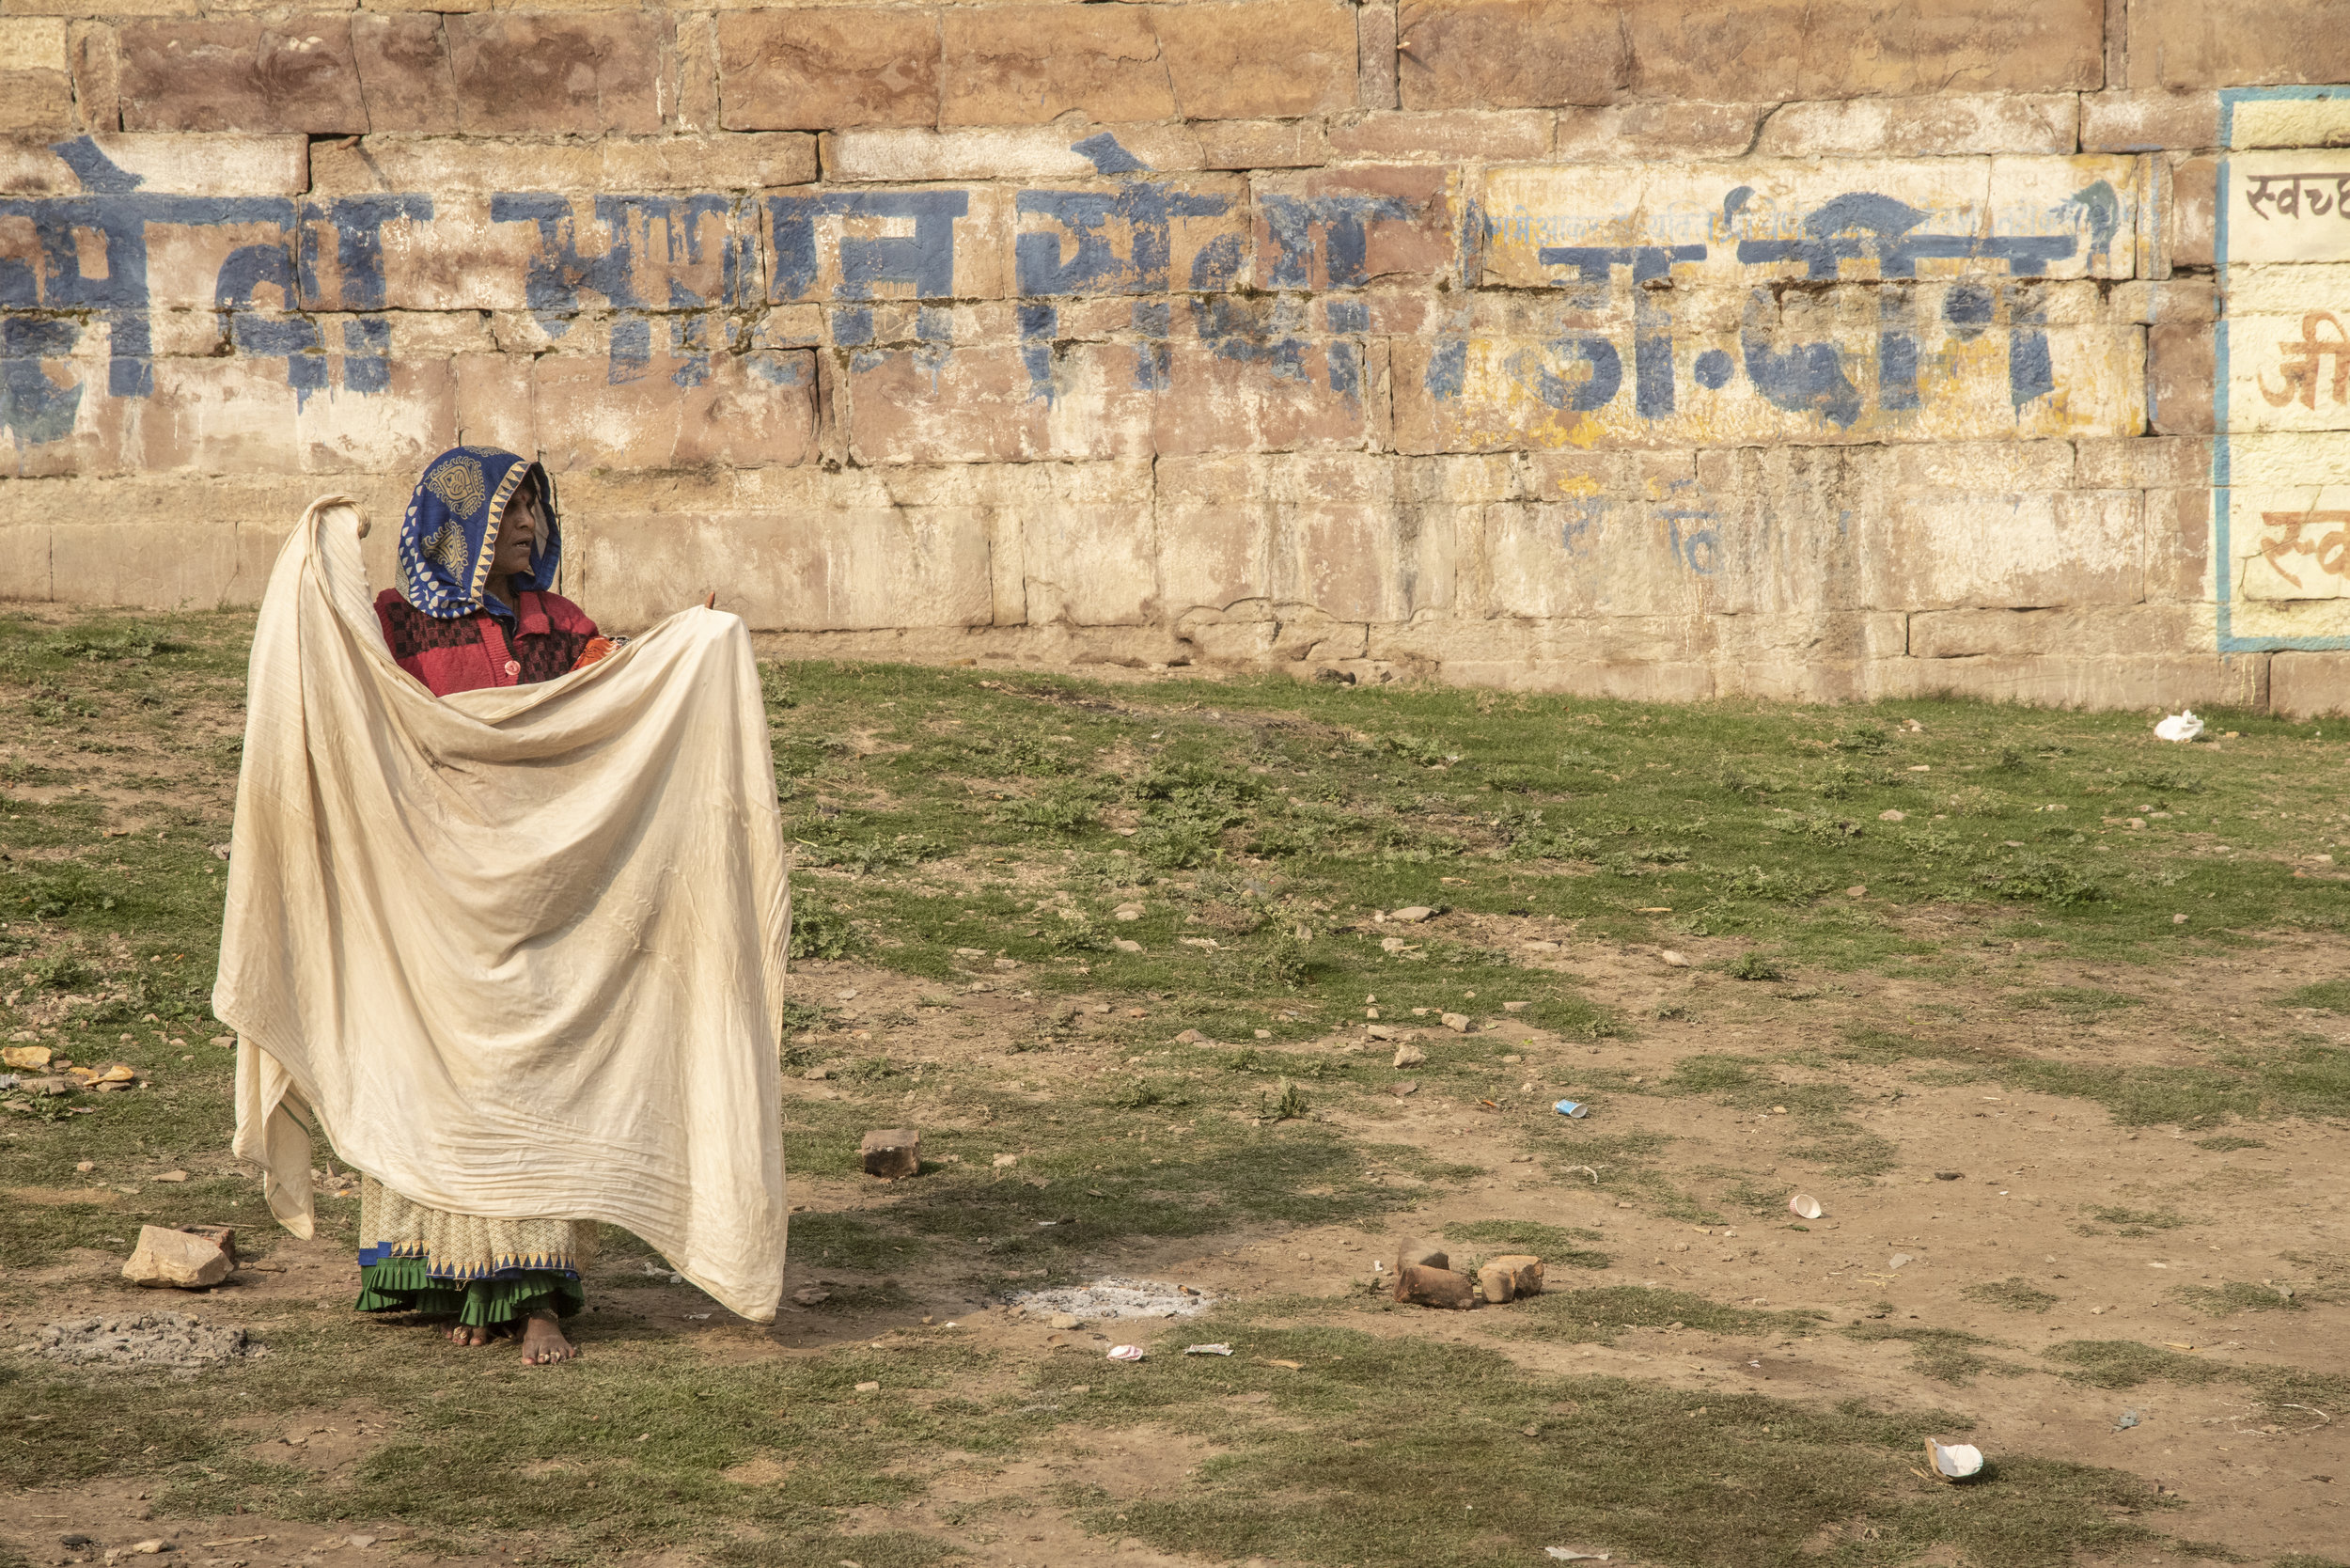  Woman stands afield, drying clothes in the sun 